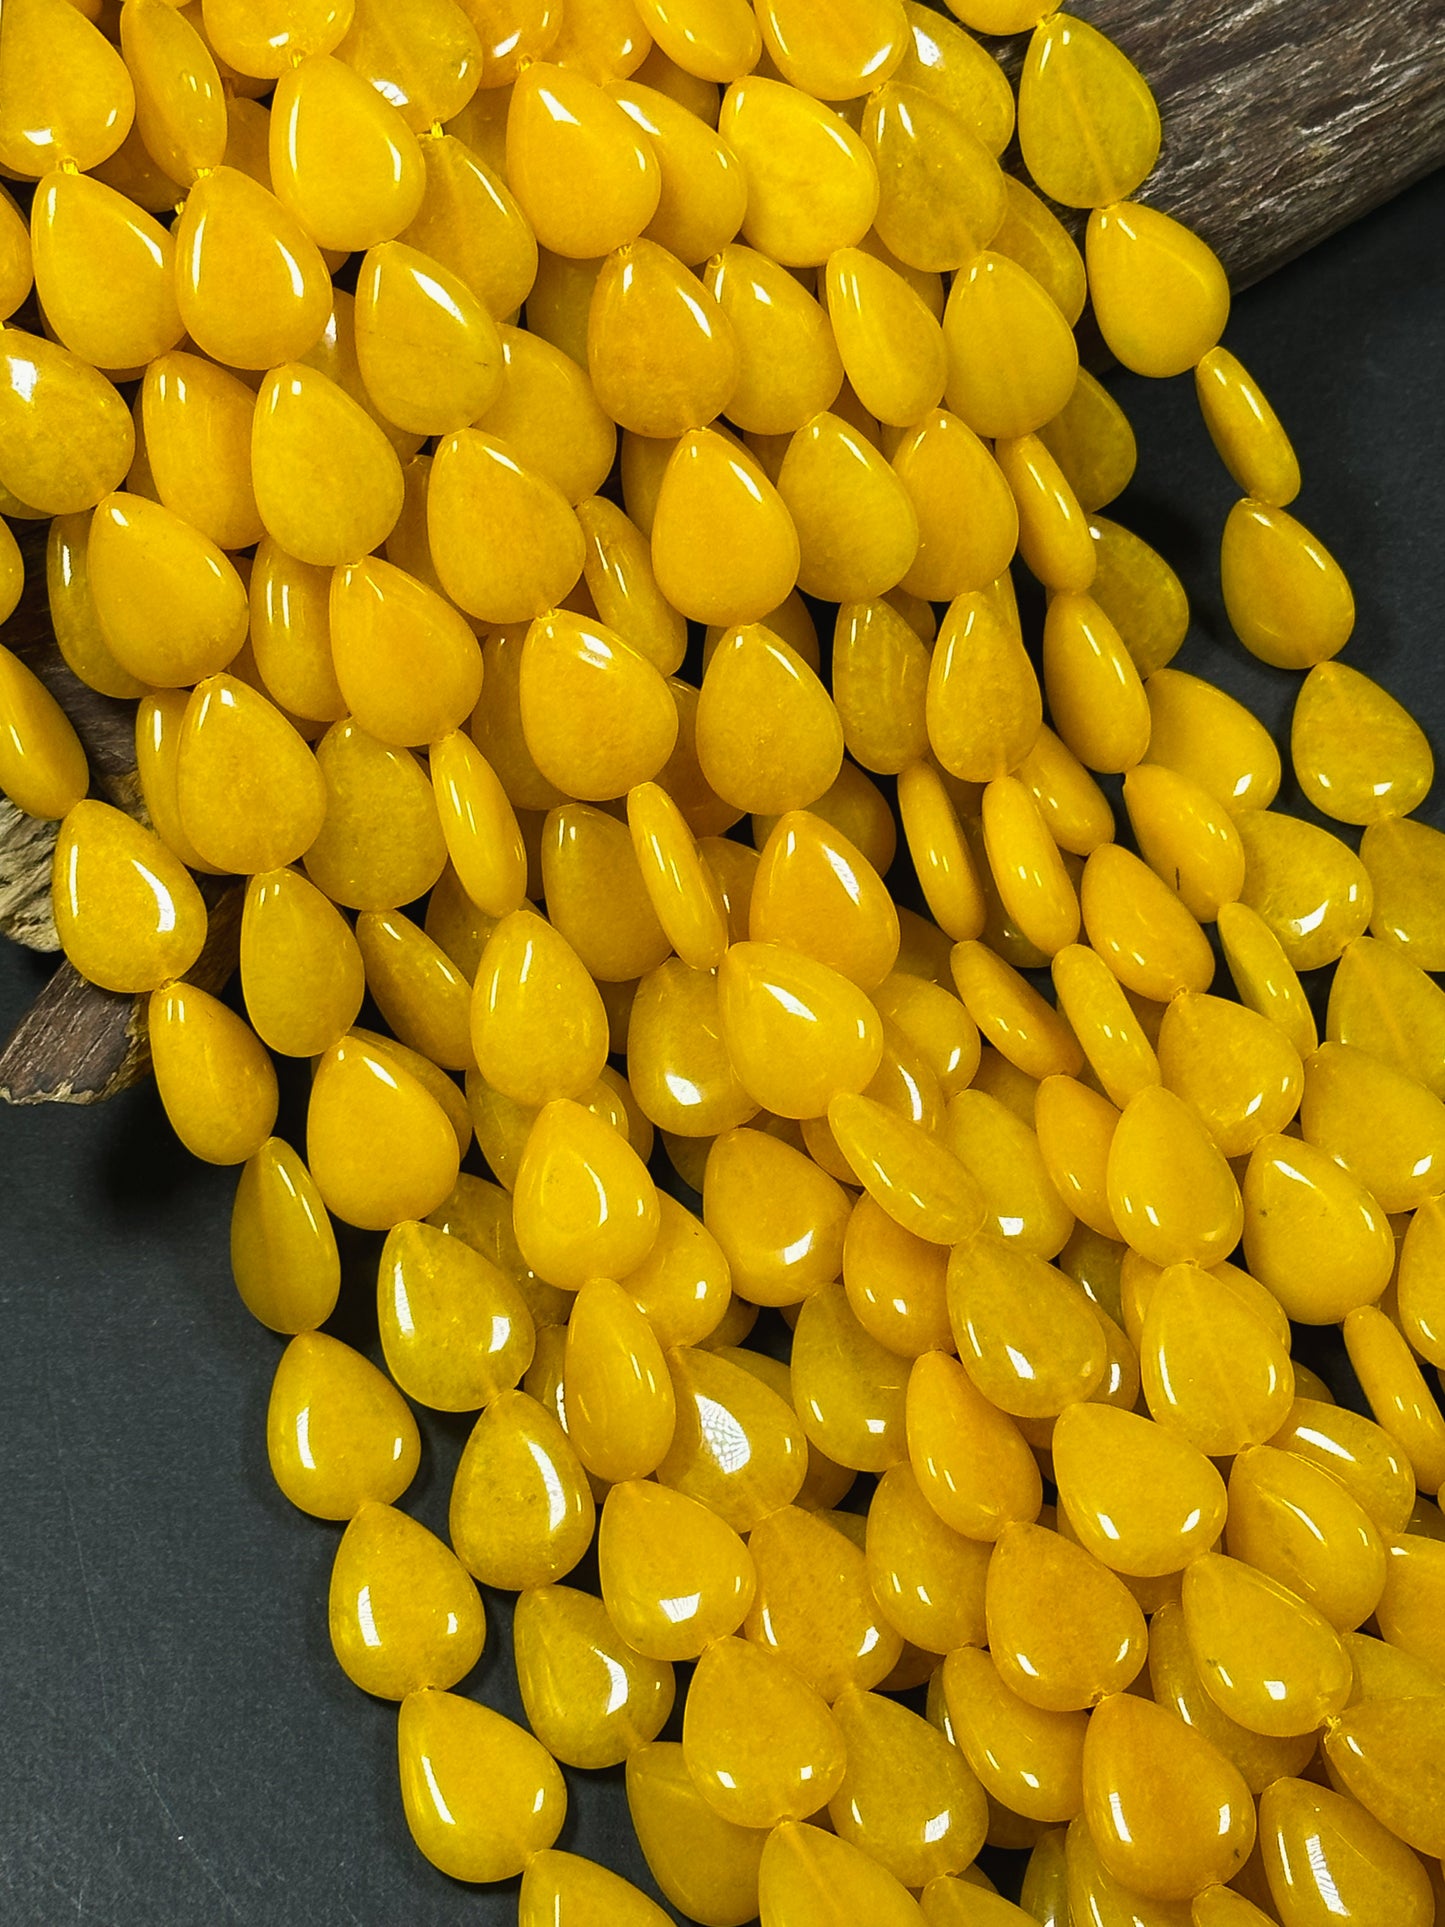 Natural Yellow Jade Gemstone Bead 20x15mm Teardrop Shape, Beautiful Yellow Color Jade Gemstone Beads, Excellent Quality Full Strand 15.5"